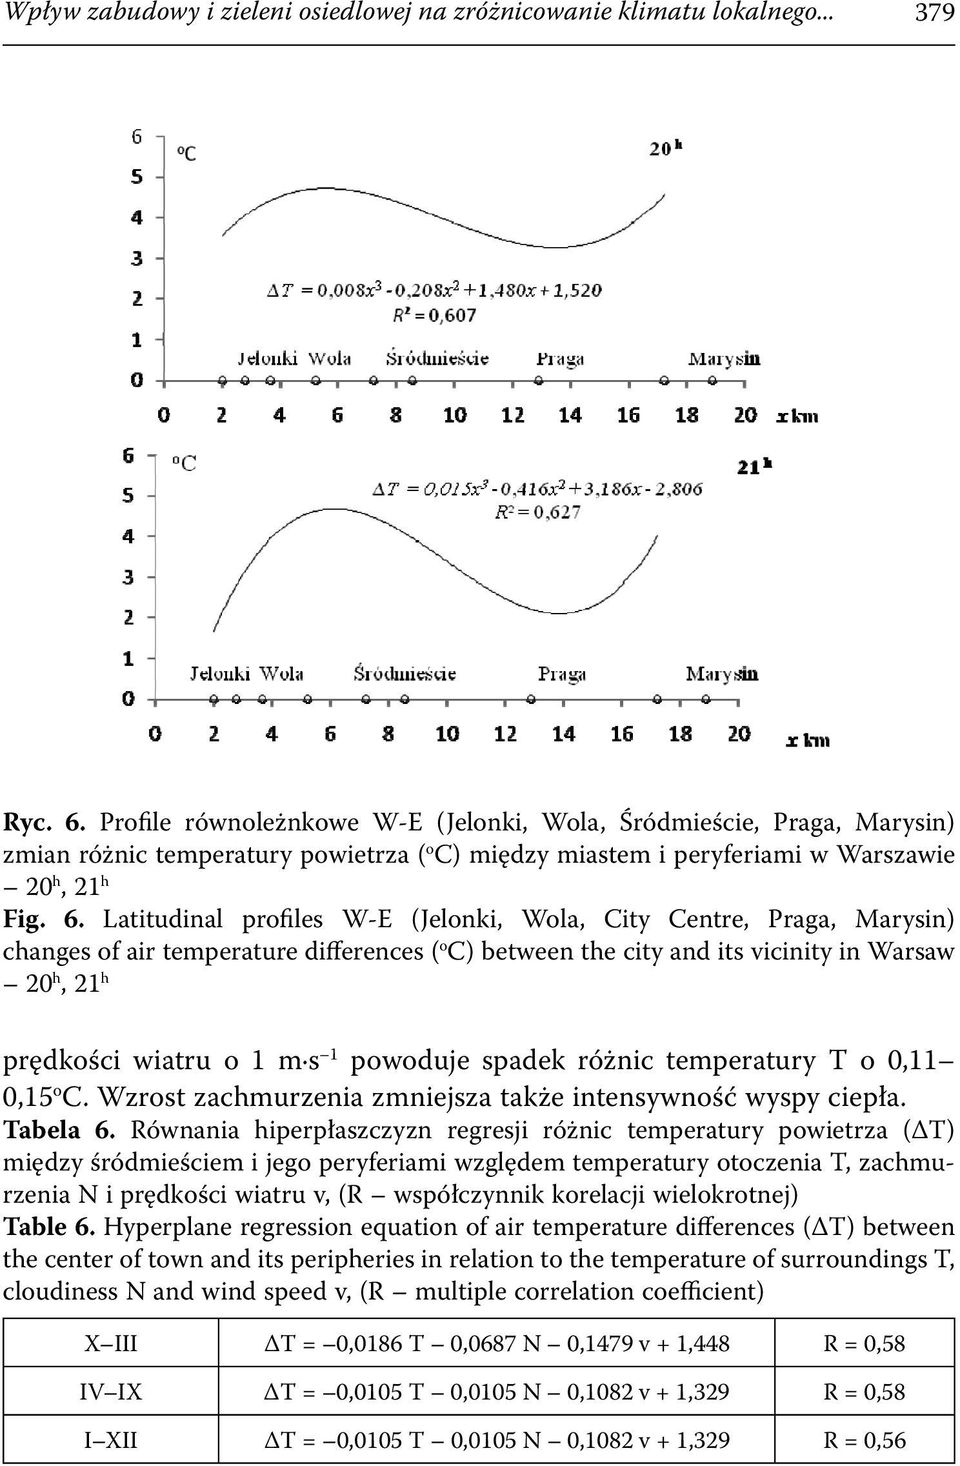 Latitudinal profiles W-E (Jelonki, Wola, City Centre, Praga, Marysin) changes of air temperature differences ( o C) between the city and its vicinity in Warsaw 20 h, 21 h prędkości wiatru o 1 m s 1